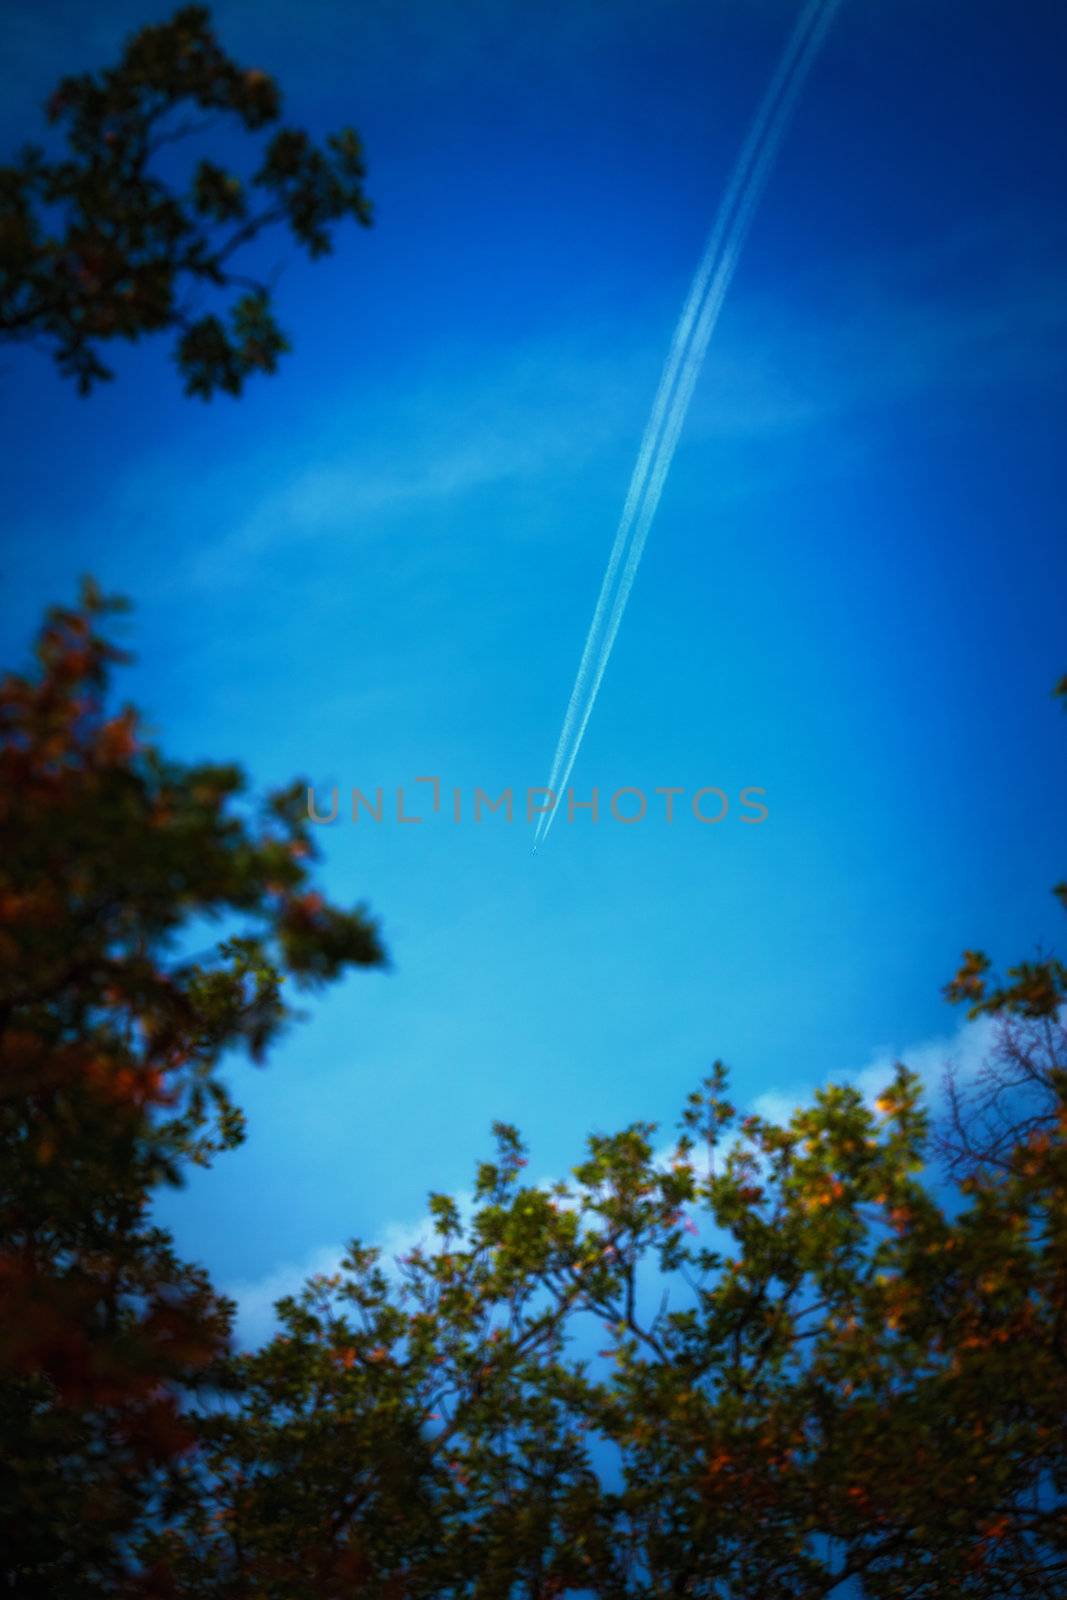 trace of the aircraft in blue sky